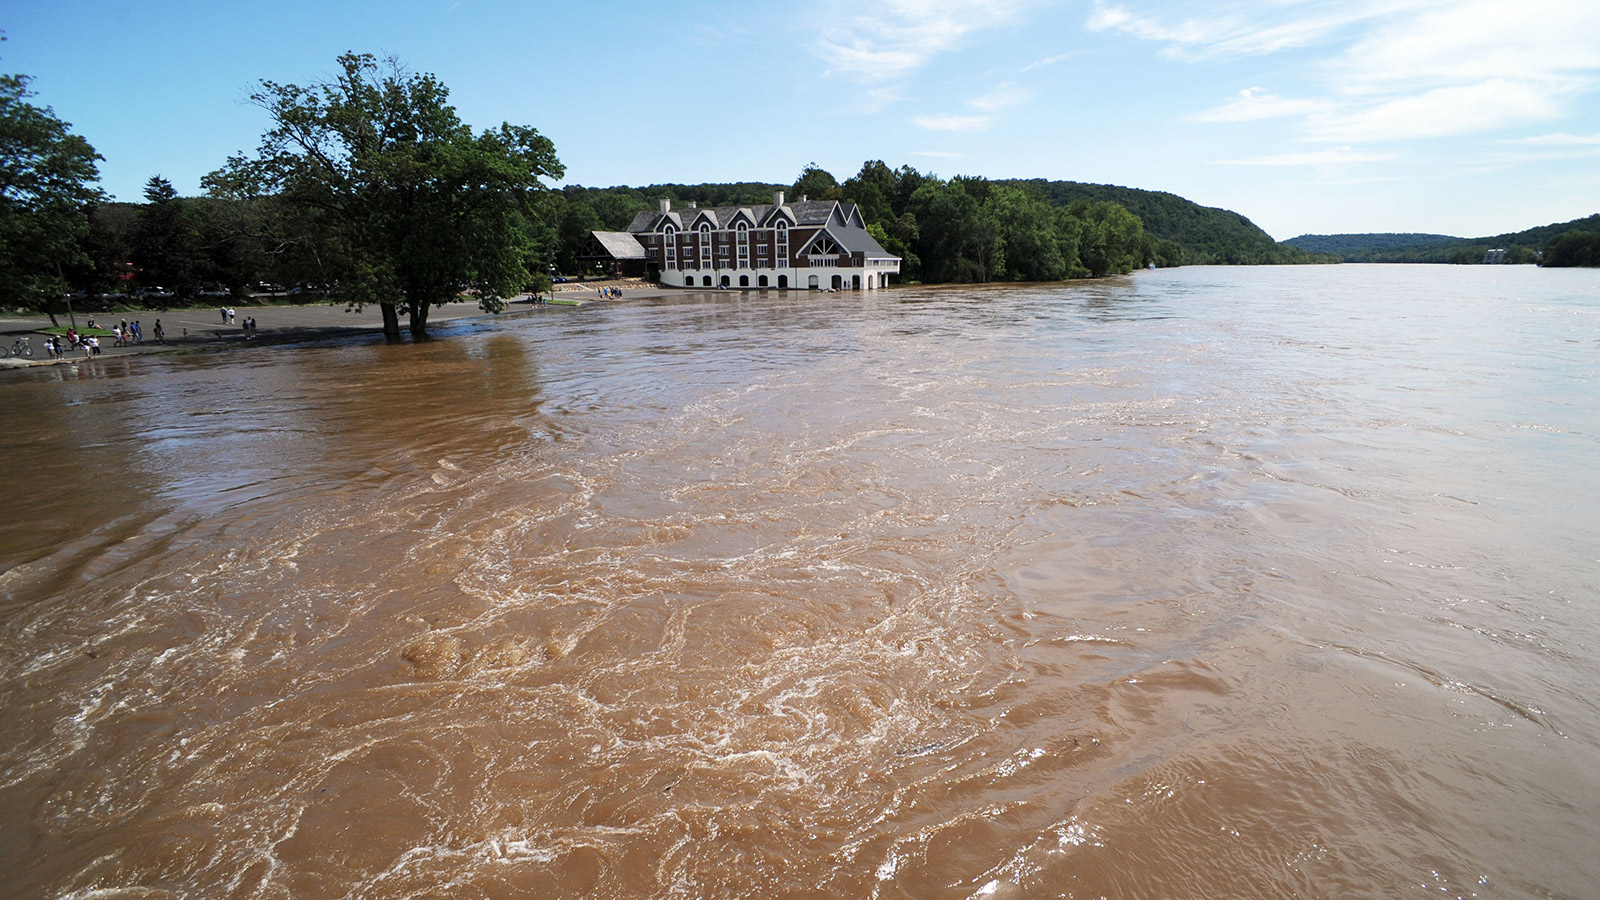 The lower level of Lambertville Inn is covered in water as the Delaware River crests August 29, 2011 in Lambertville, New Jersey.